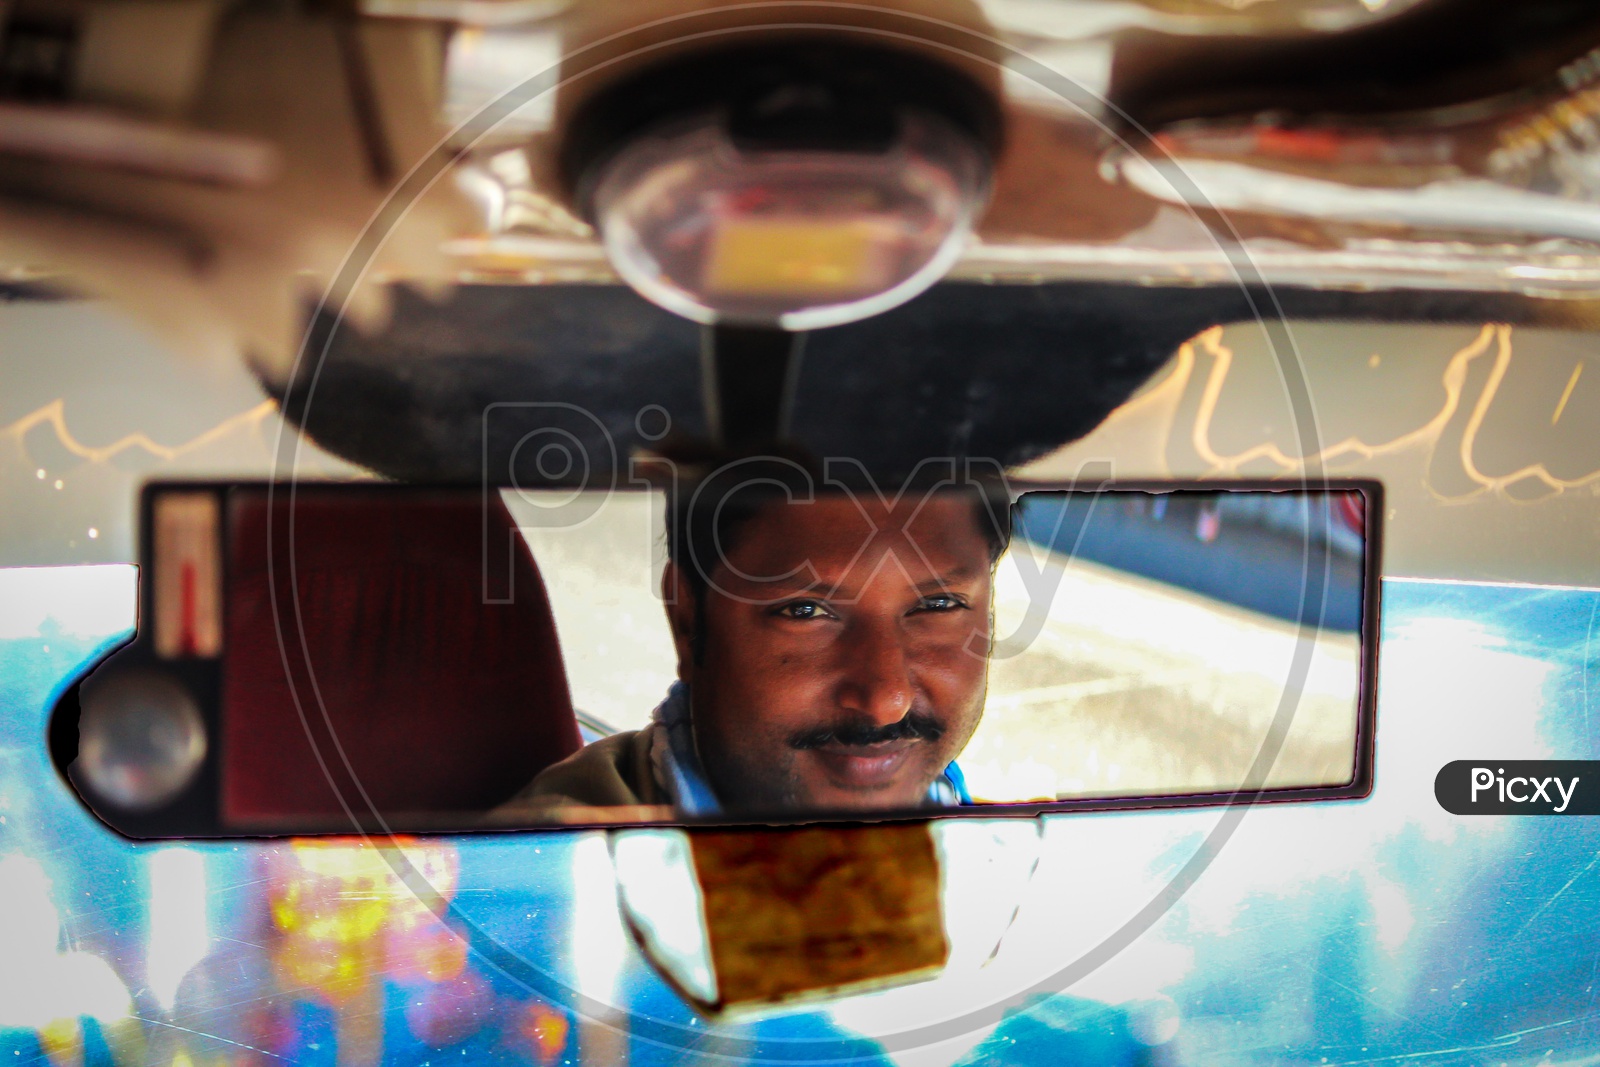 taxiwala looking in the mirror of taxi